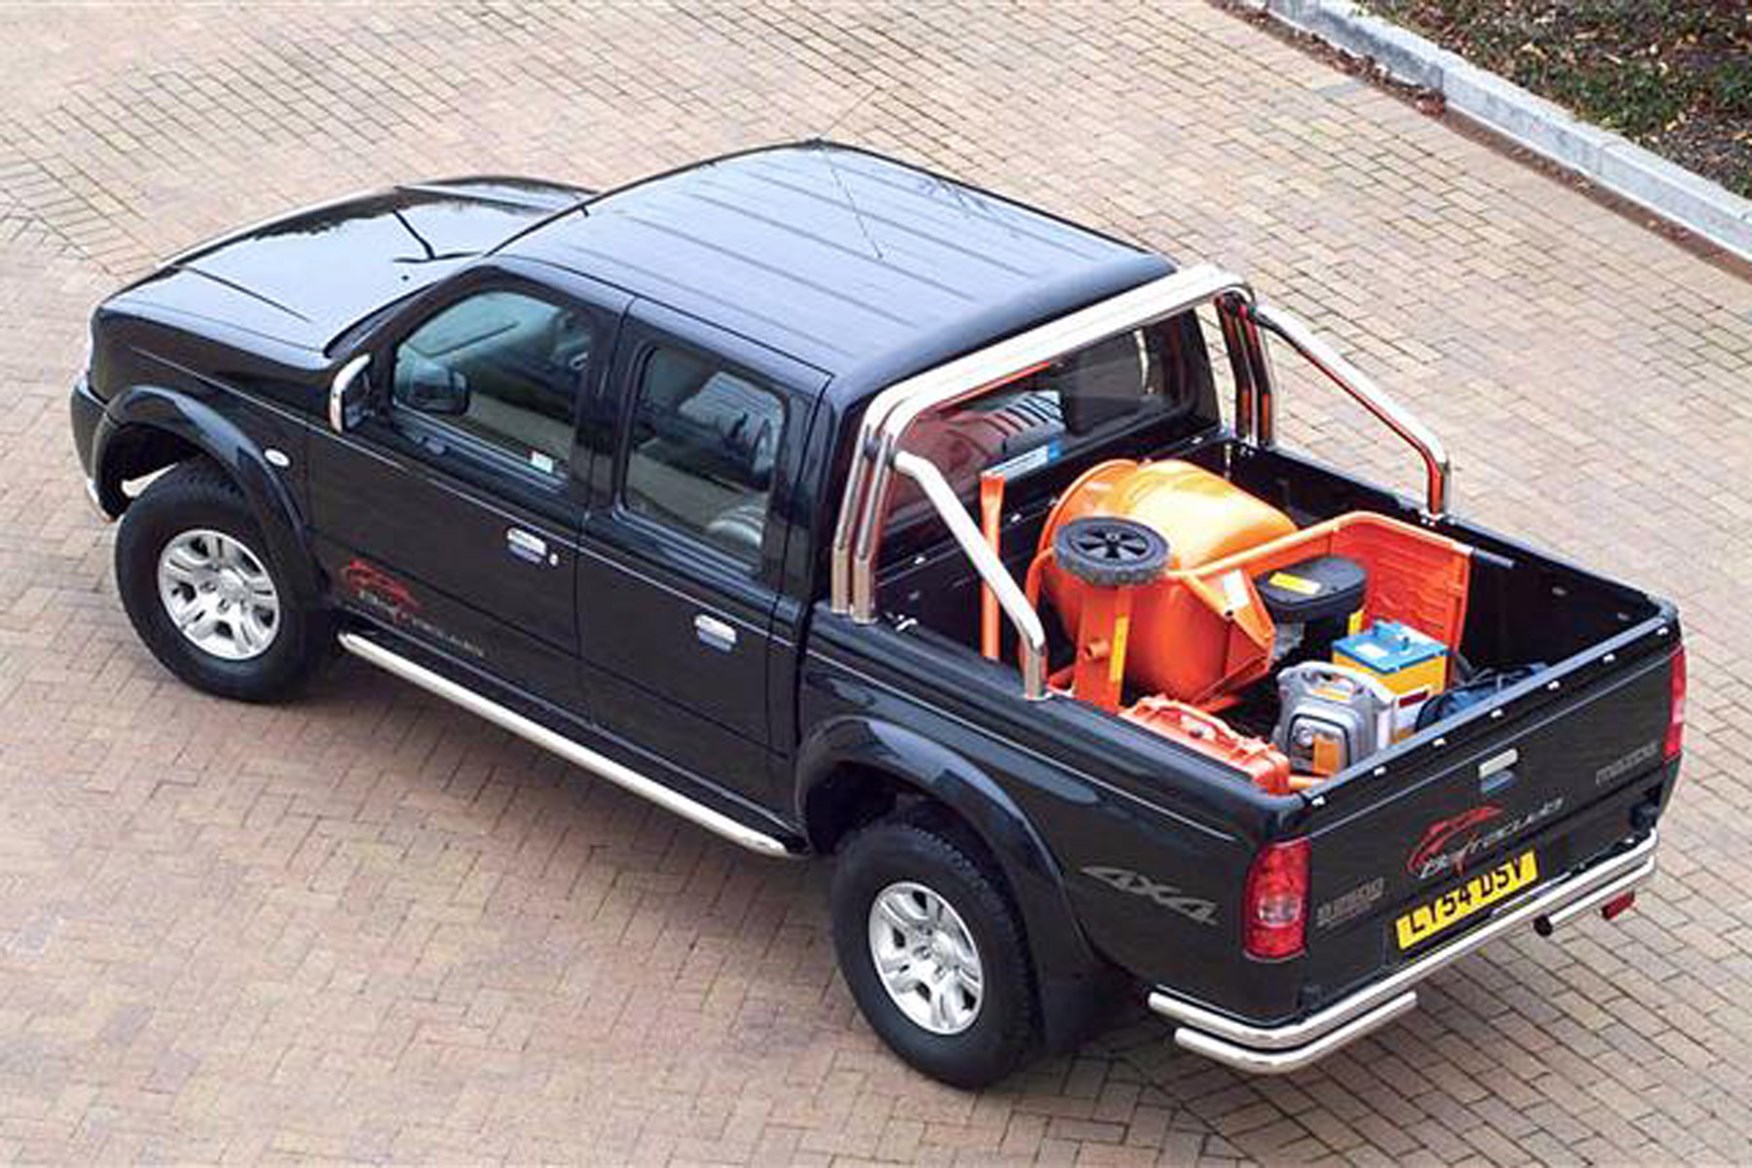 Mazda B Series review on Parkers Vans - load area and payload